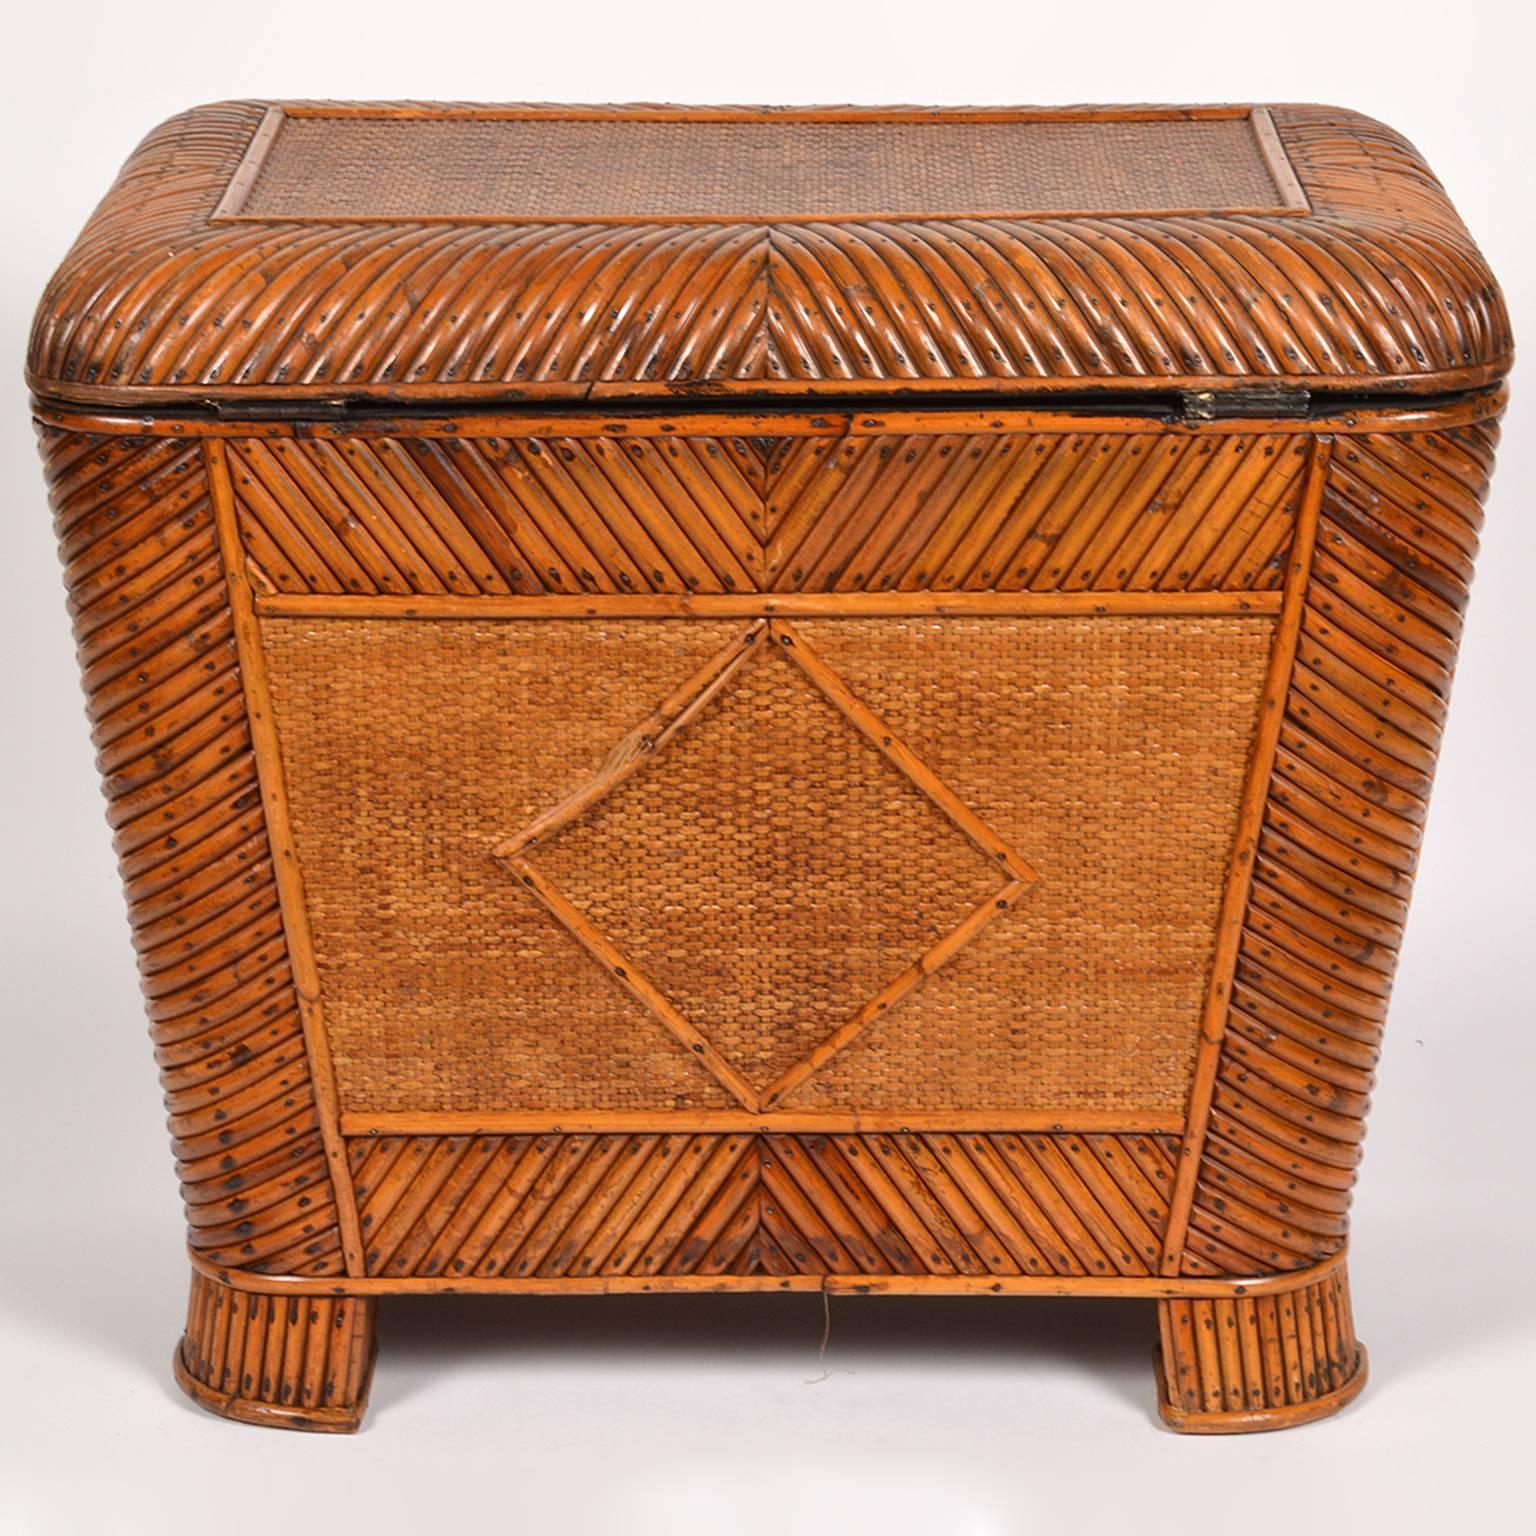 19th Century English Patterned Bamboo and Raffia Weave Covered Storage Box 4